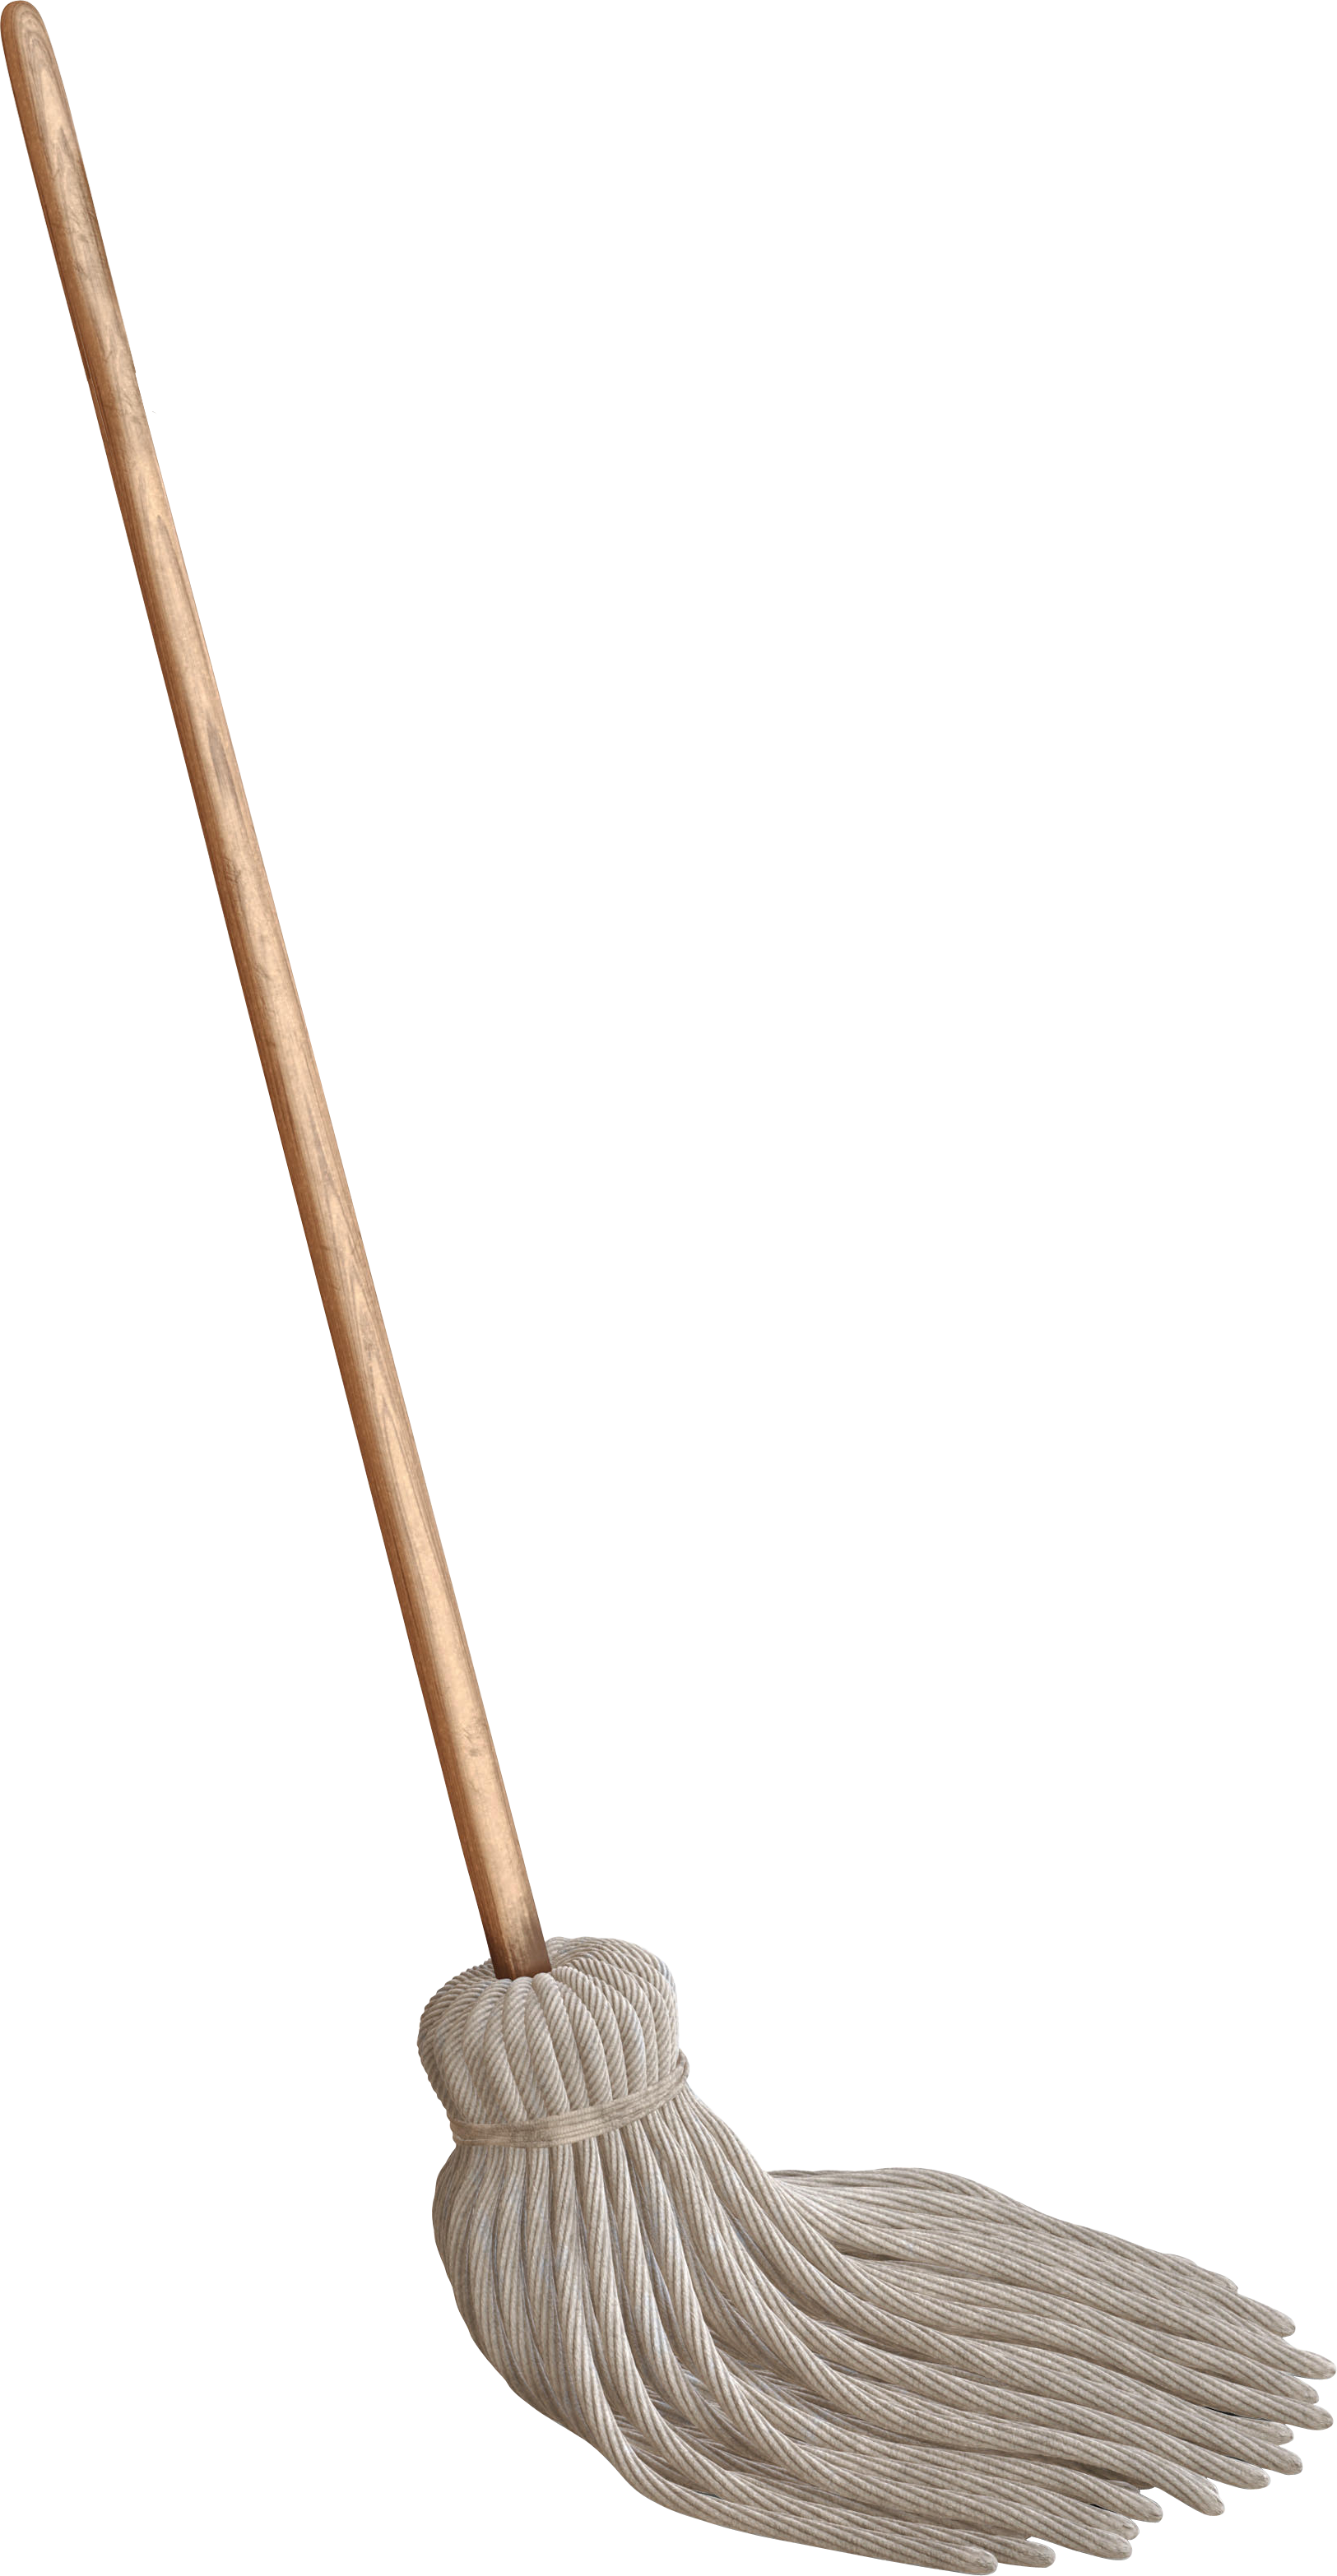 A Wooden Stick With A Ball On It